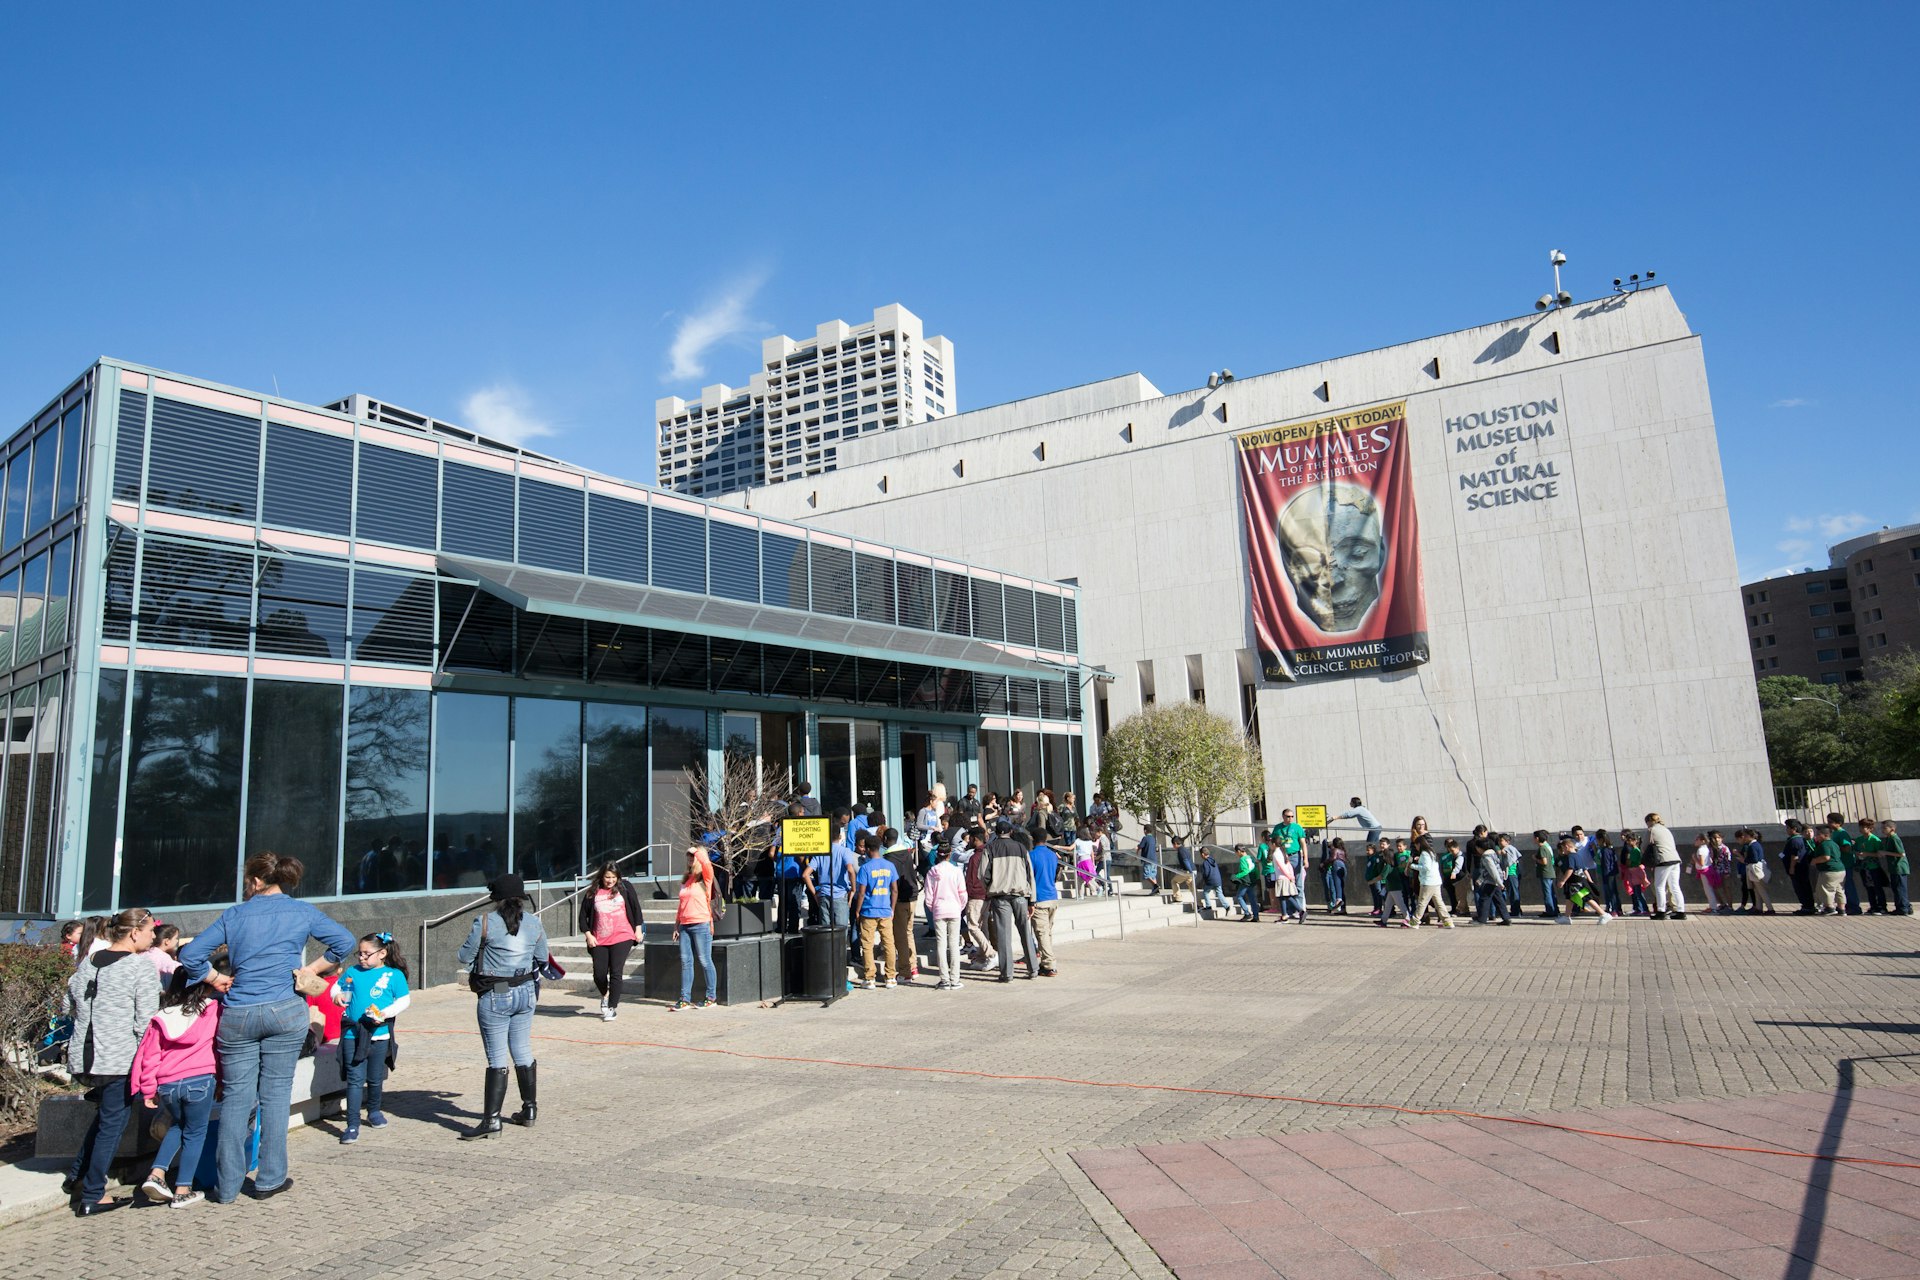 An exterior view of the entrance to the Houston Museum of Natural Science with people crowding around